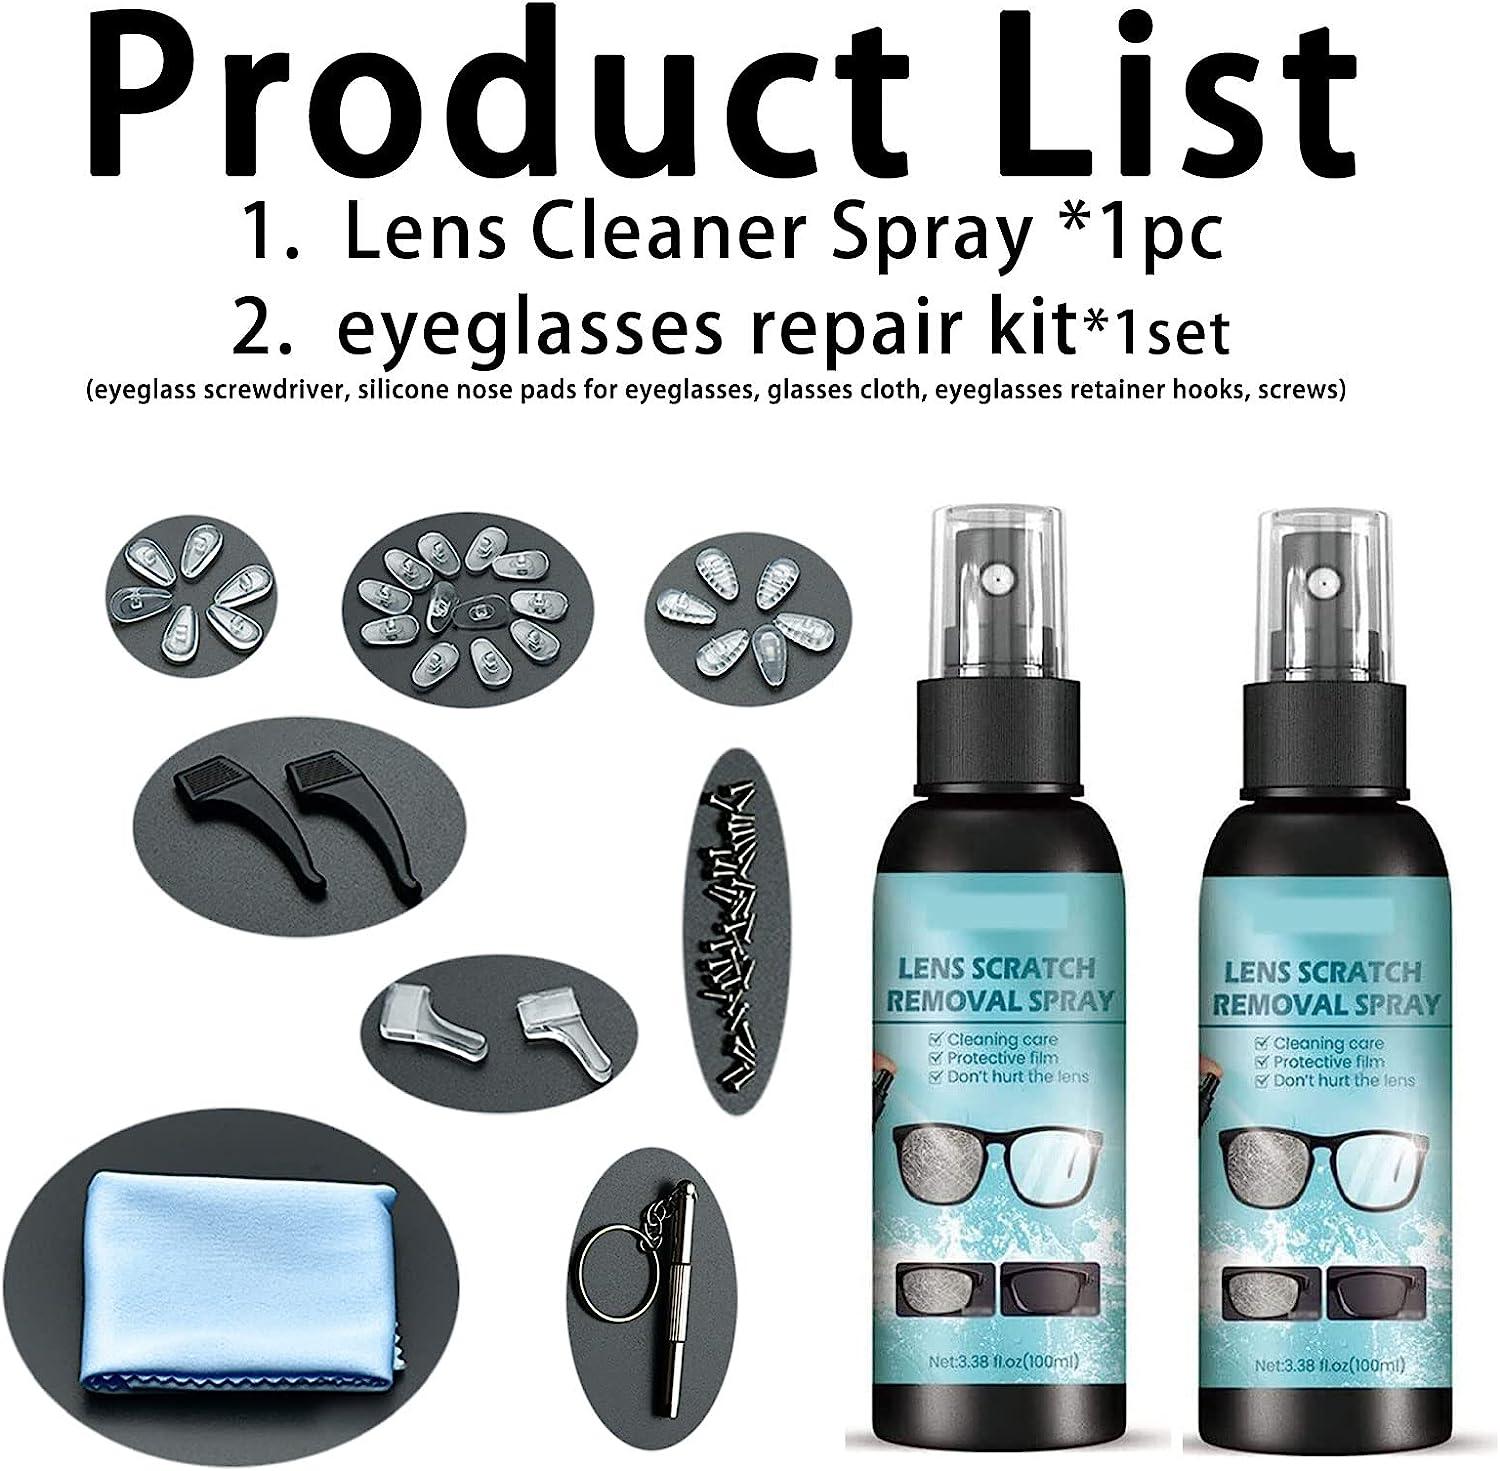 Lens Scratch Removal Spray for Lens Glass Repair Removes K